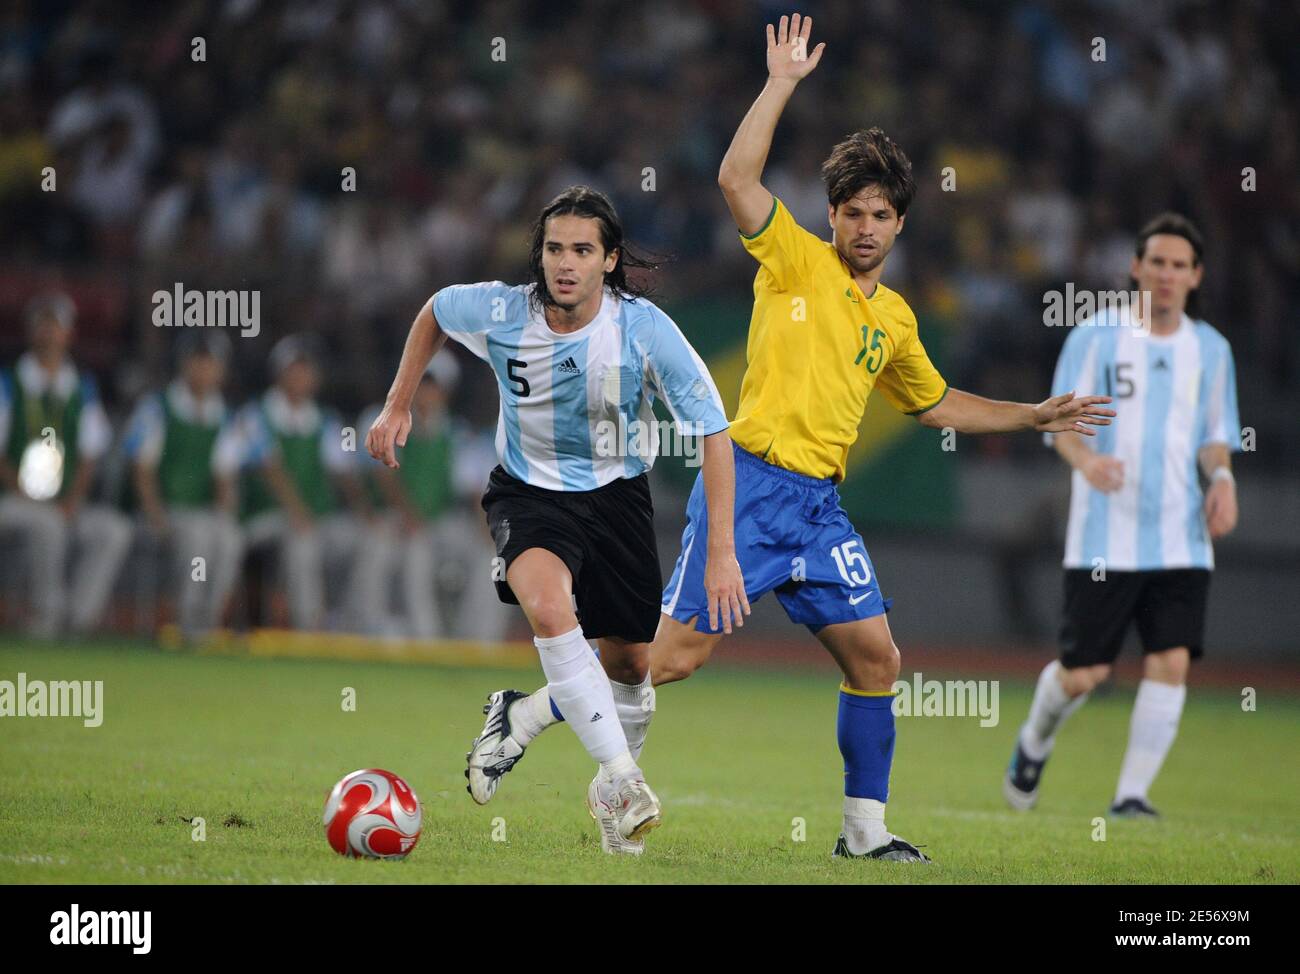 Argentina's Fernando Gago during the football semi-final match held at the Worker's Stadium for the 2008 Beijing Olympics, August 19, 2008. Argentina defeats Brazil 3-0. Photo by Gouhier-Hahn-Nebinger/Cameleon/ABACAPRESS.COM Stock Photo